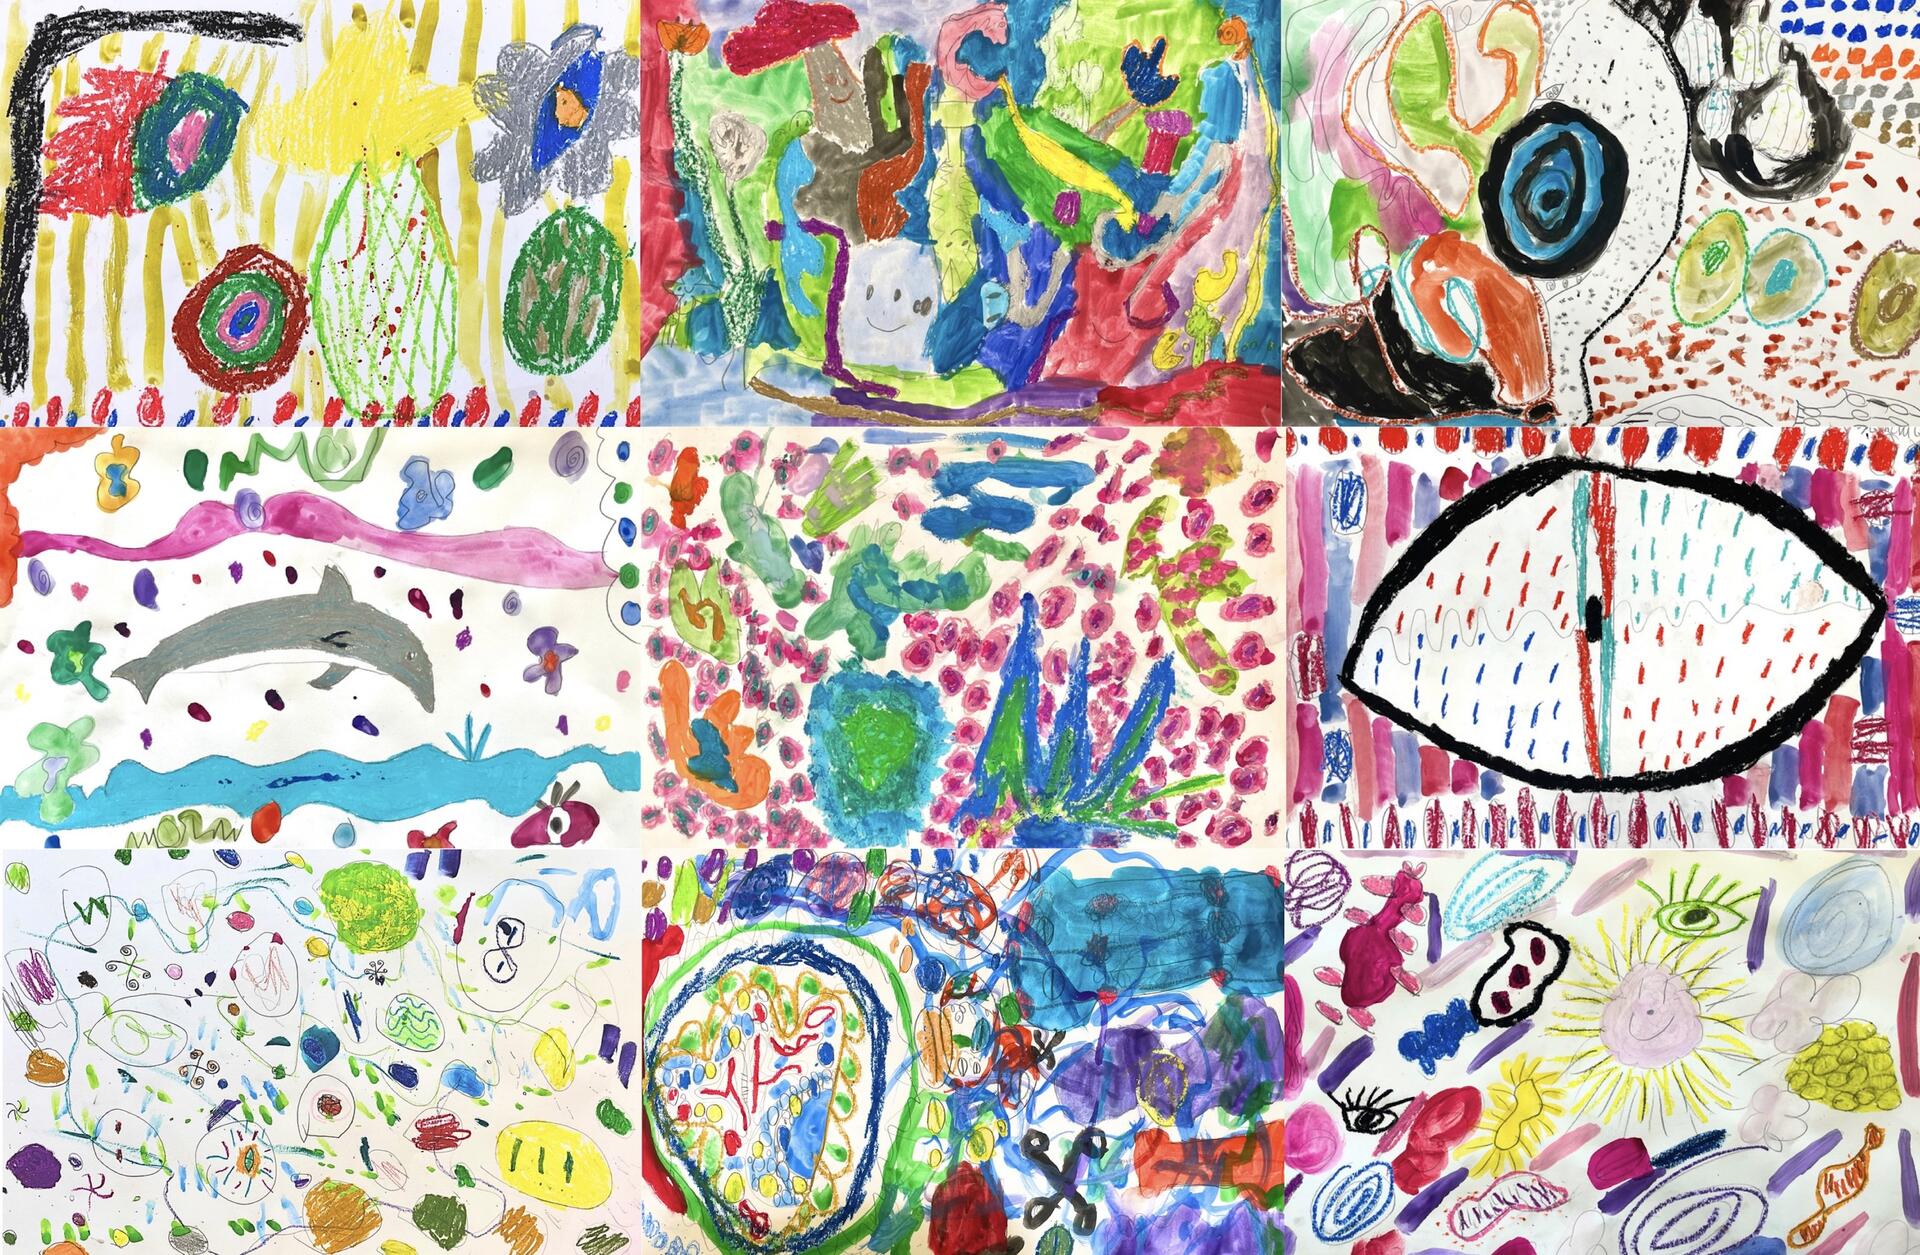 Students learned to identify organic shapes, lines, colors, and patterns in Yayoi Kusama's artwork and created their own abstract paintings, demonstrating creativity and imagination.